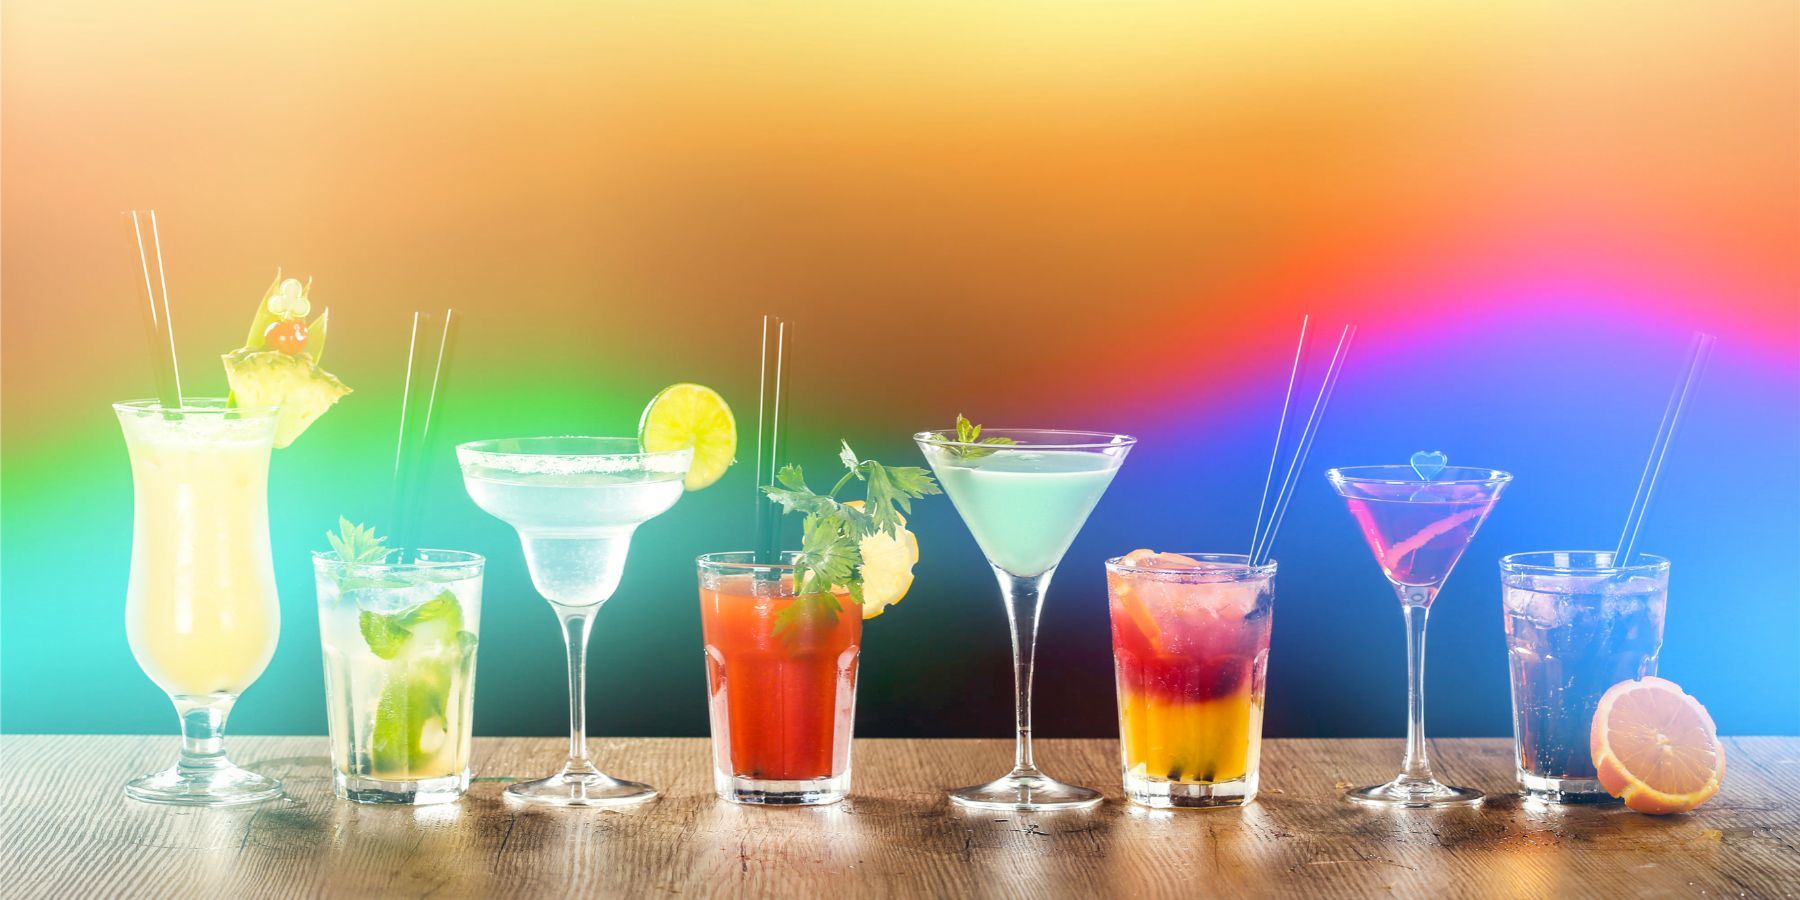 70s cocktails with psychedelic background